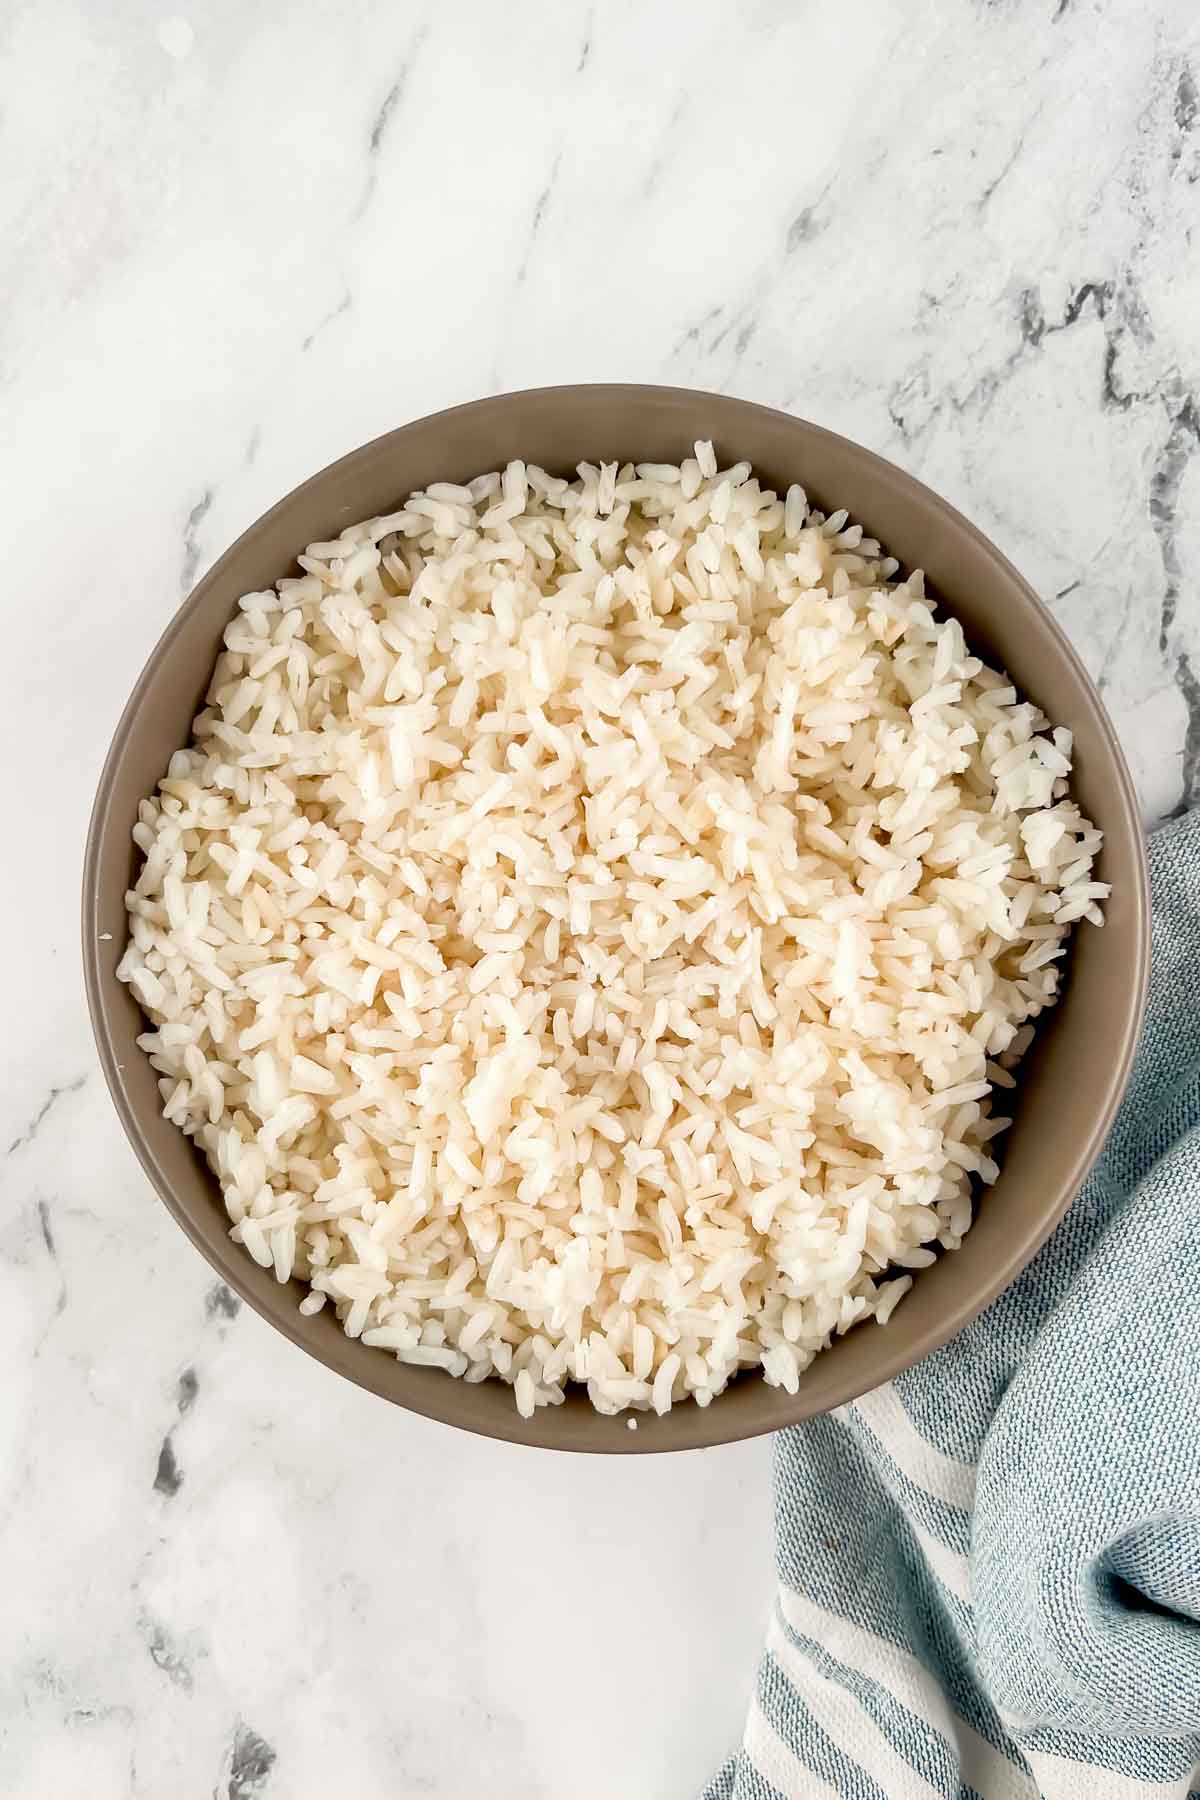 White rice in tan bowl on marble background.